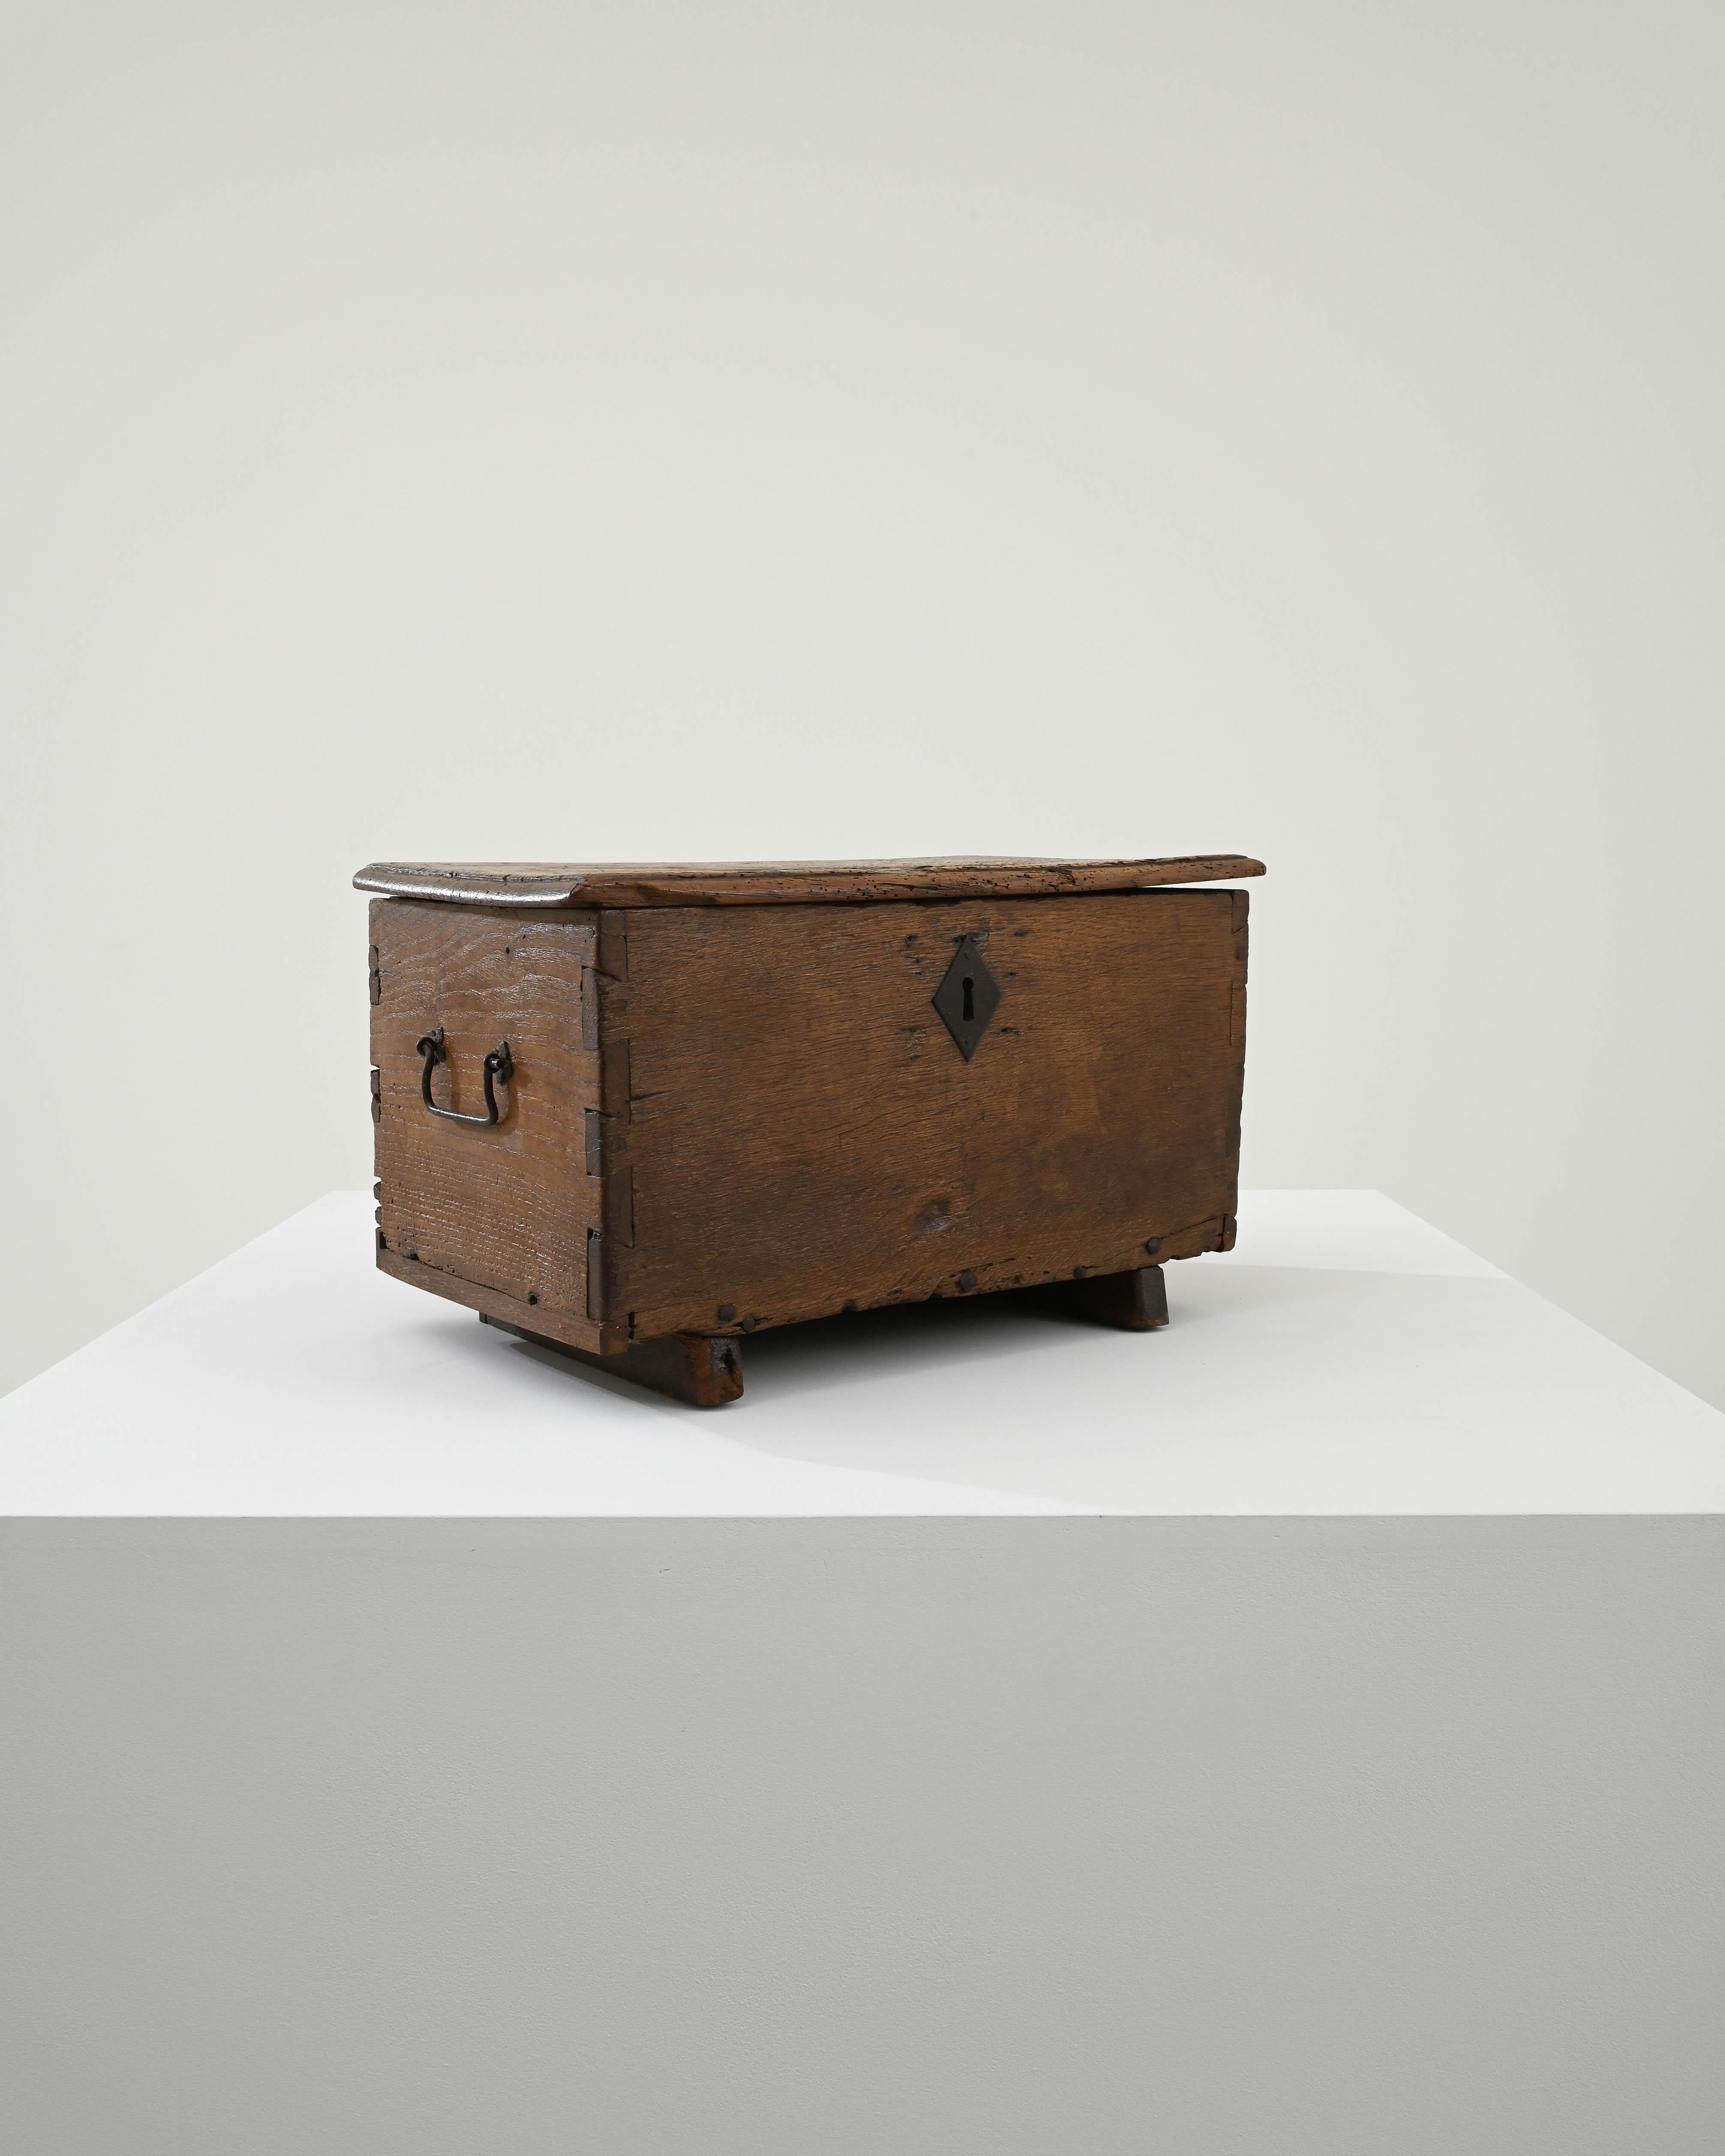 A wooden trunk created in 19th century France. A reminder of simple times, this small wooden trunk exudes a sense of authenticity with a time-touched patina. The surface of the oak is covered with tales of its past. Assembled with box joinery and